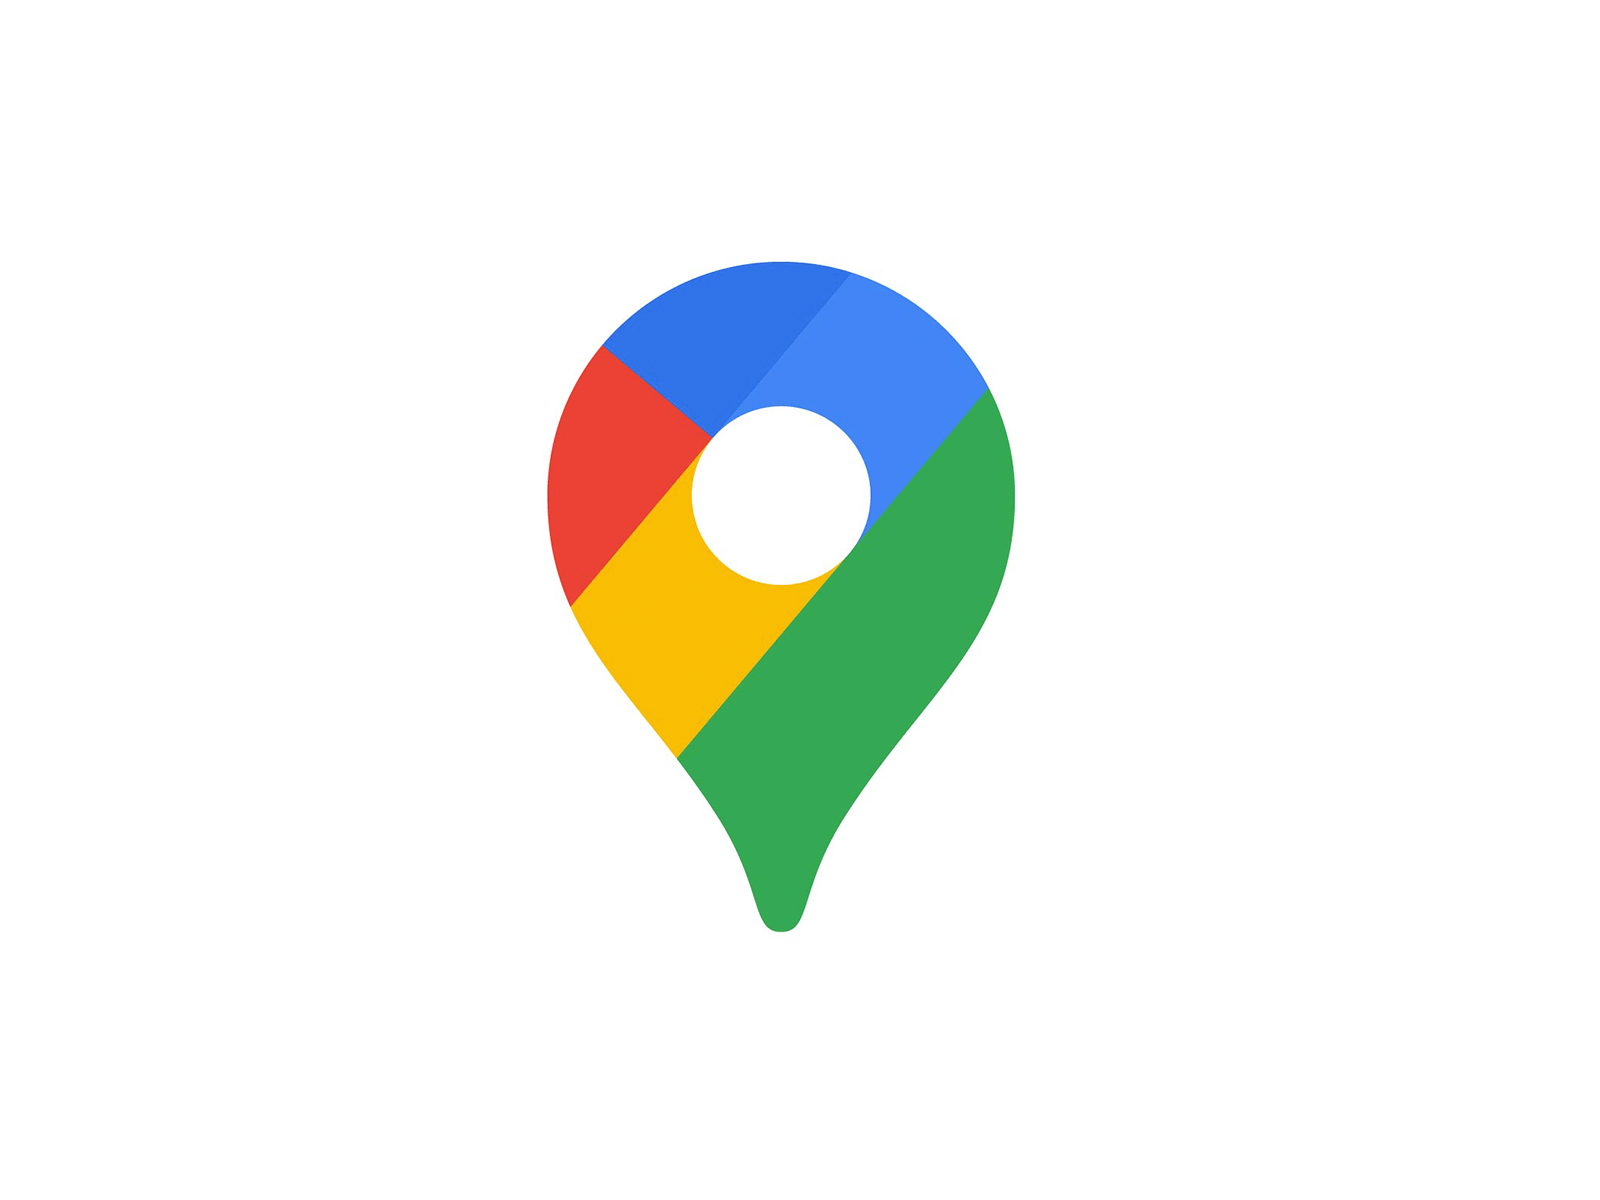 A Google maps icon on a white background